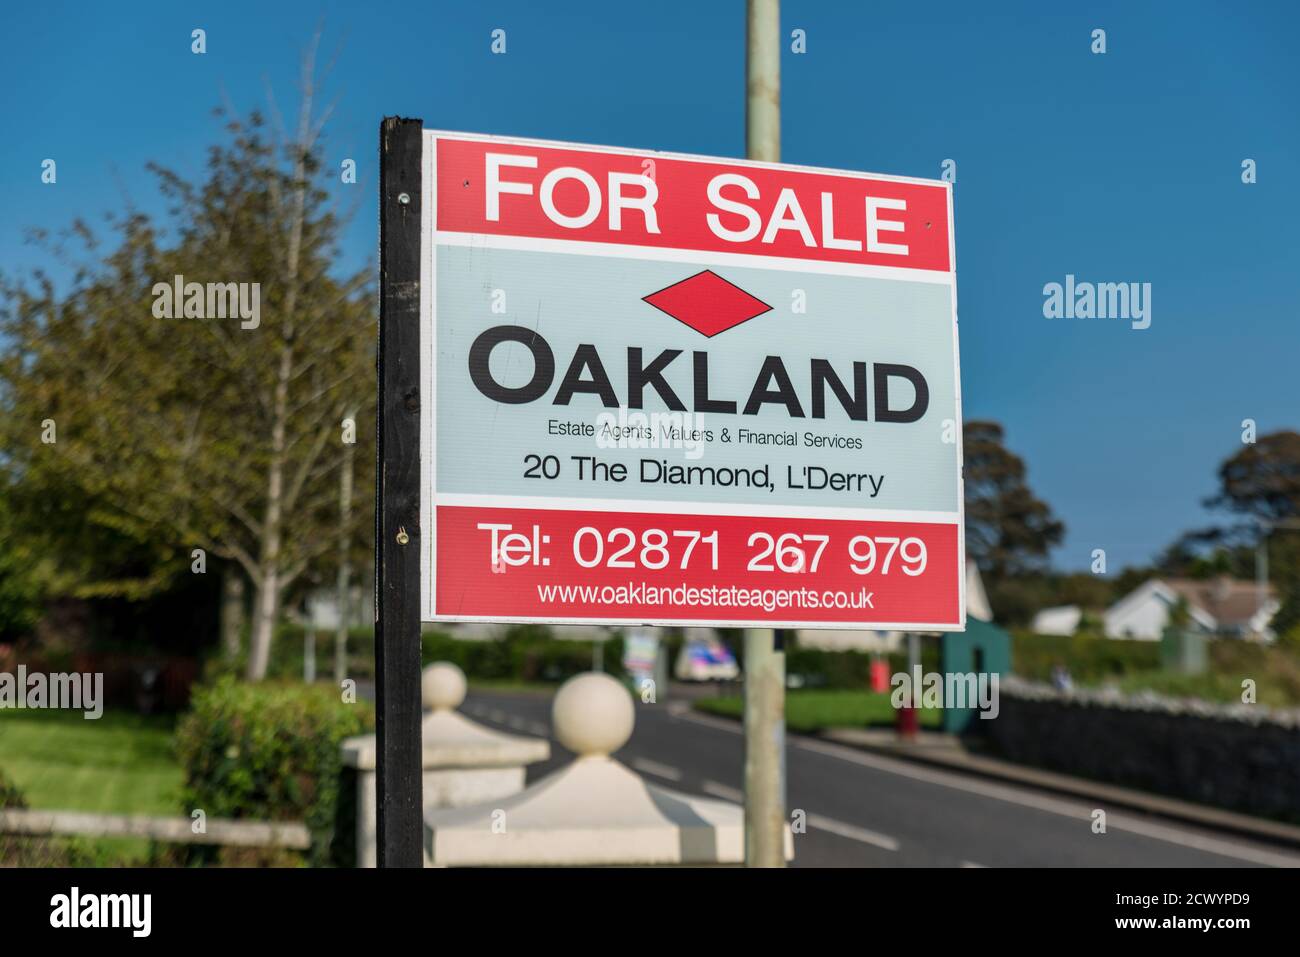 Derry, Northern Ireland- Sept 17, 2020: For sale sign  for Oakland Estate agent in Derry. Stock Photo